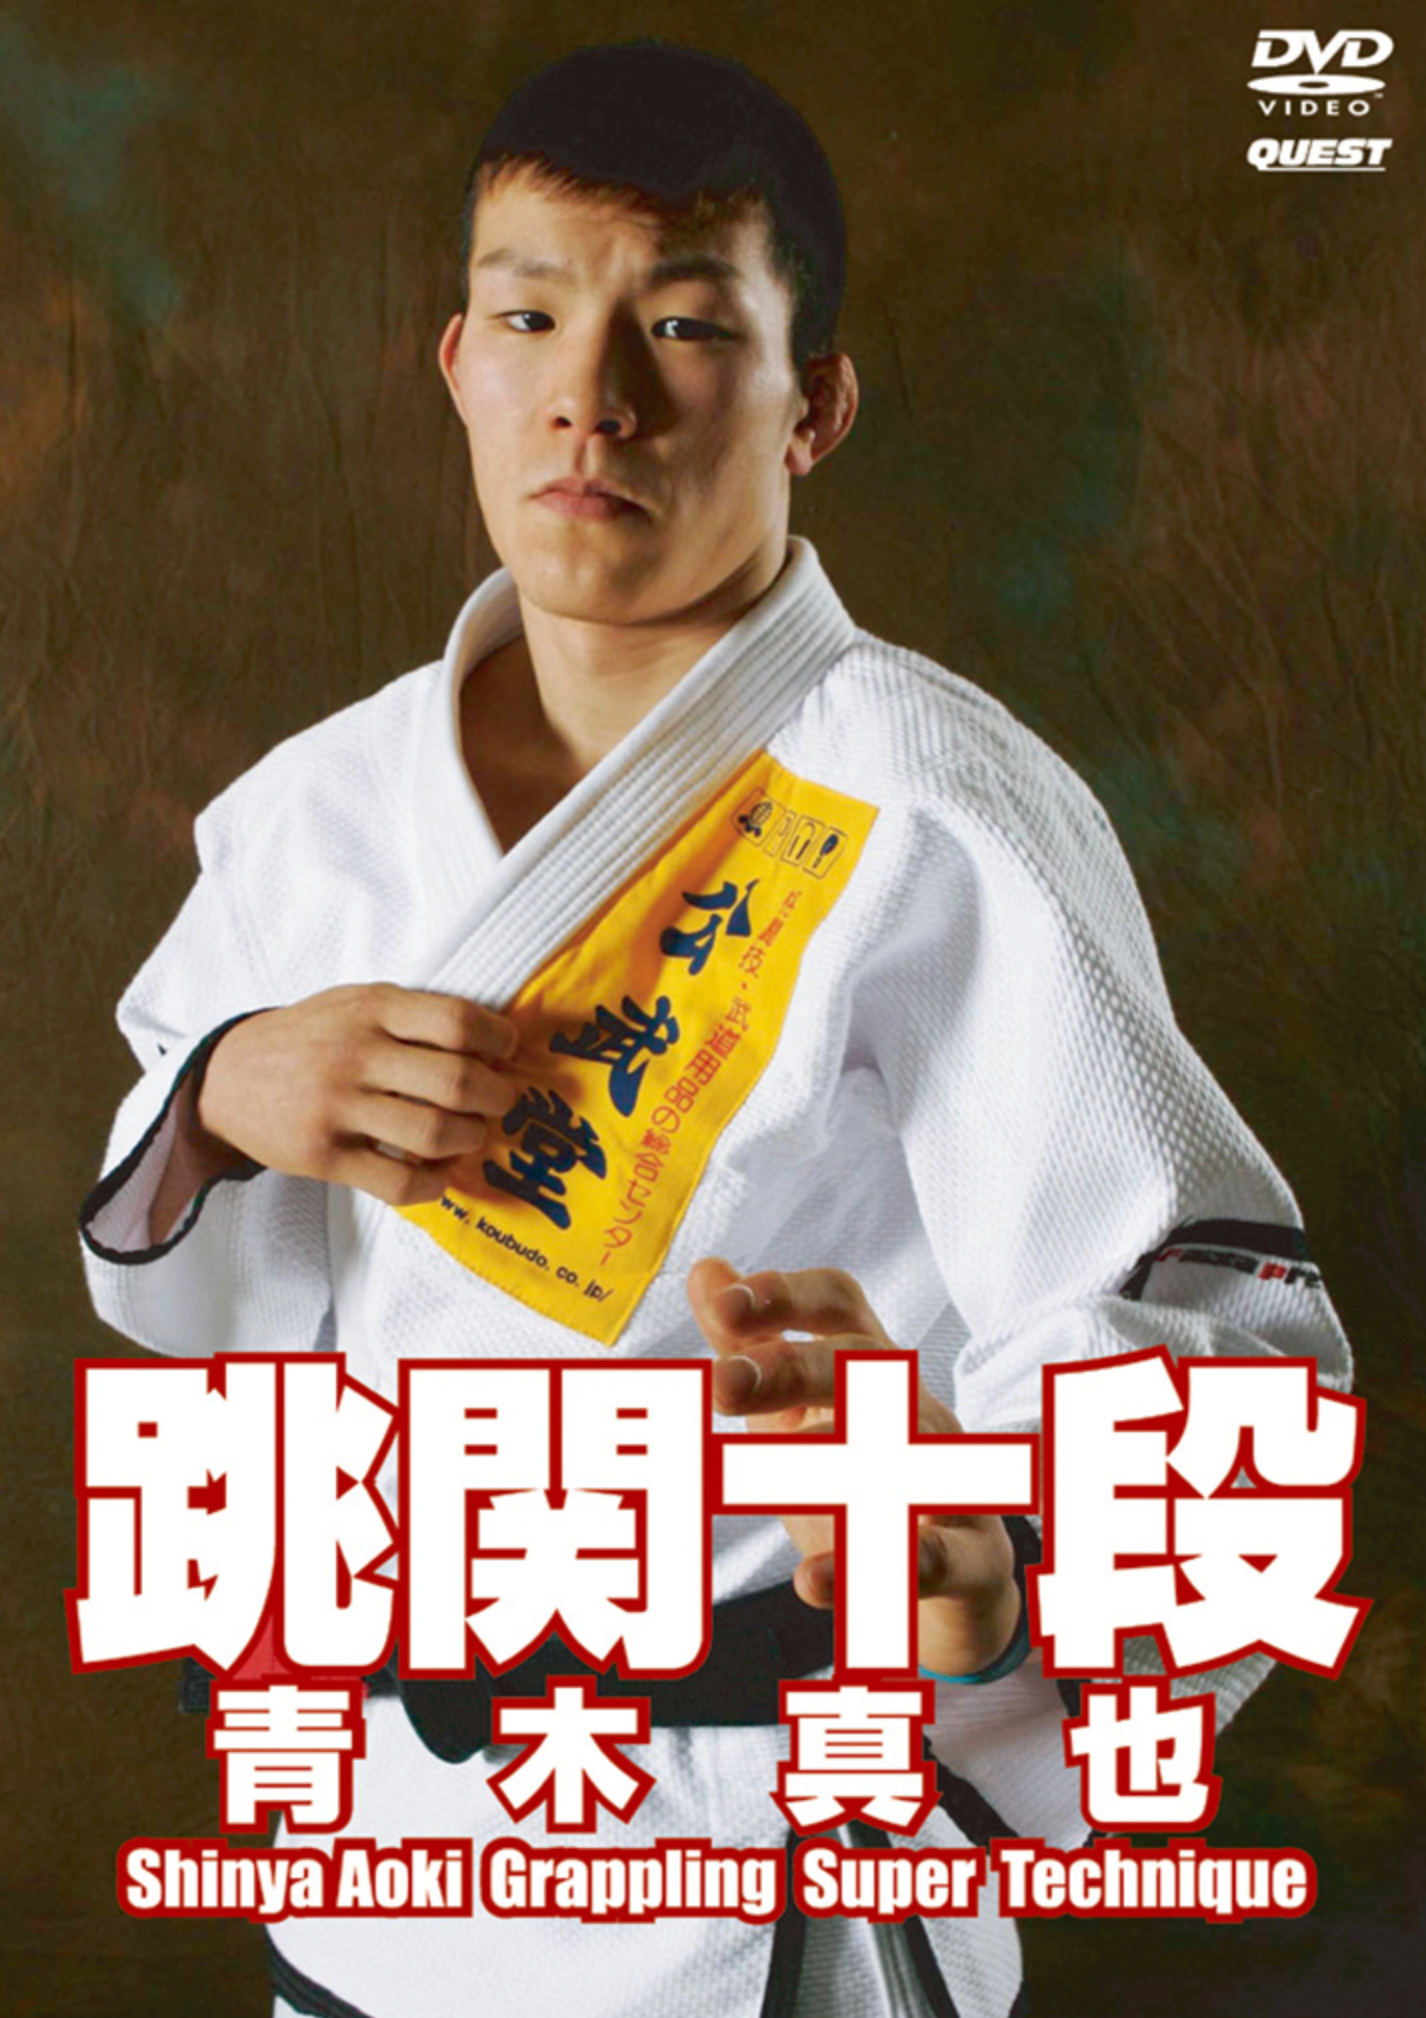 Super Grappling Techniques DVD by Shinya Aoki - Budovideos Inc